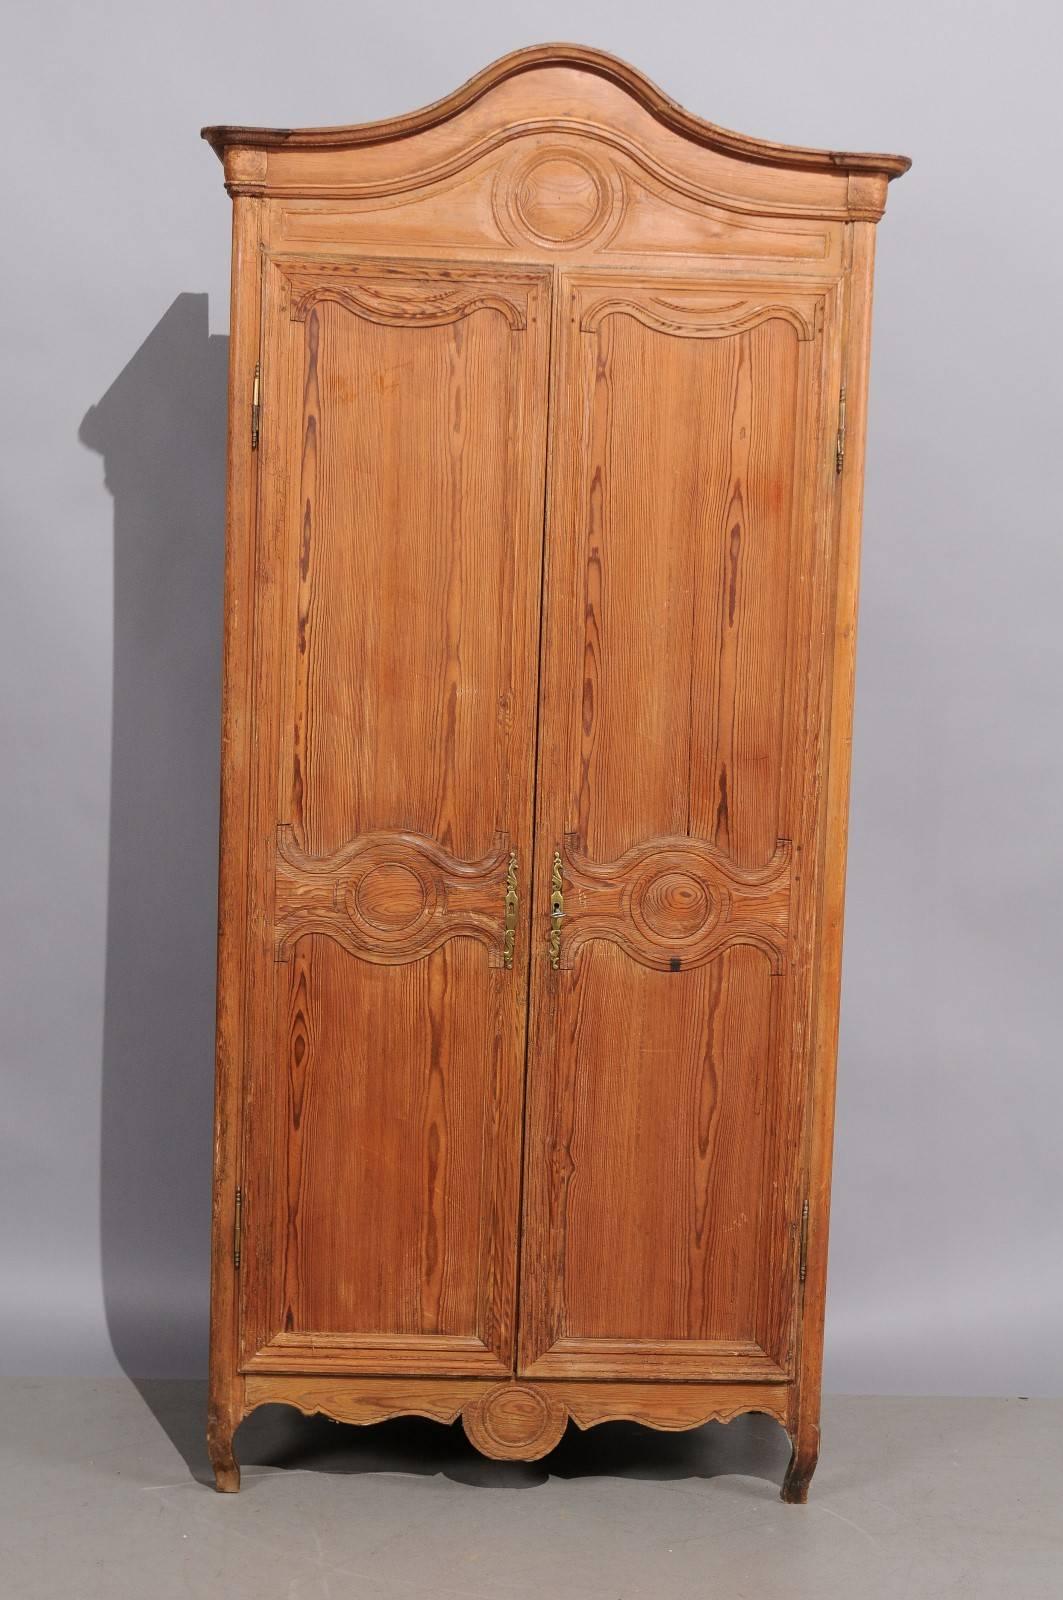 Louis XV style armoire in pine with double cabinet door, arched cornice, cabriole feet, and one (1) interior shelf, 19th century, France.